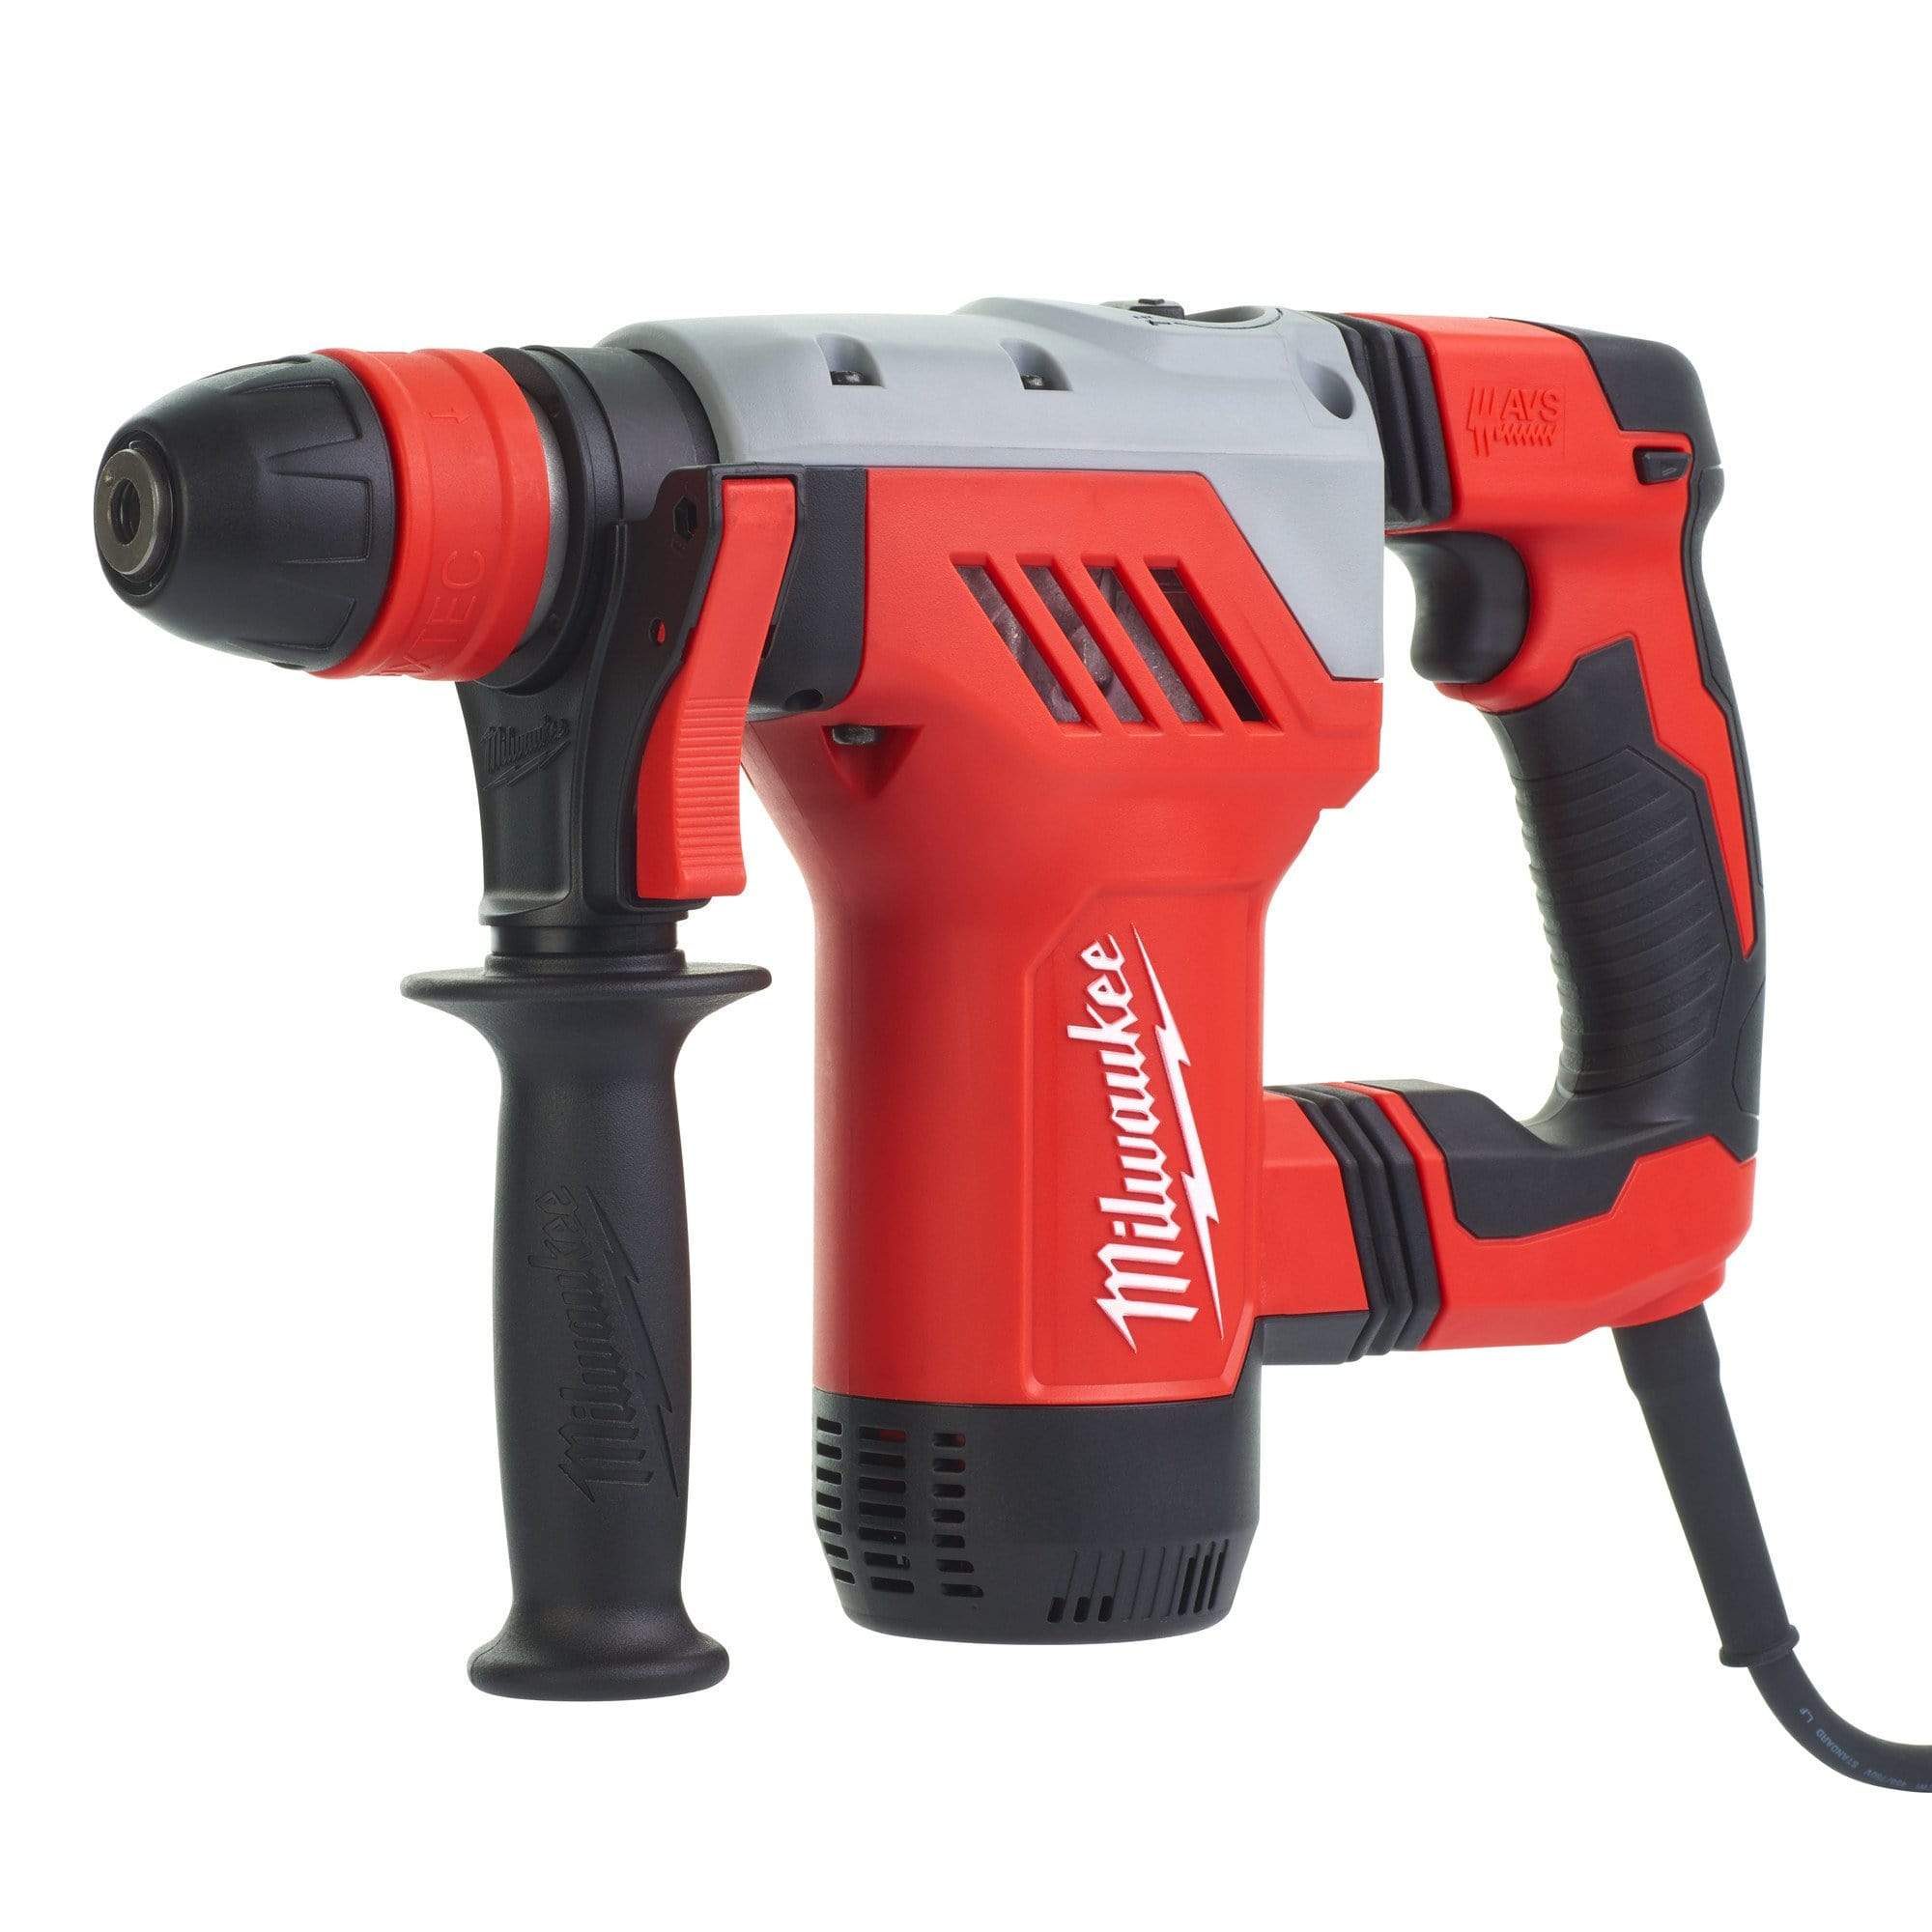 Milwaukee 28mm 800W SDS-Plus L-Shaped Hammer Drill - PLH 28 E | Supply Master | Accra, Ghana Tools Building Steel Engineering Hardware tool